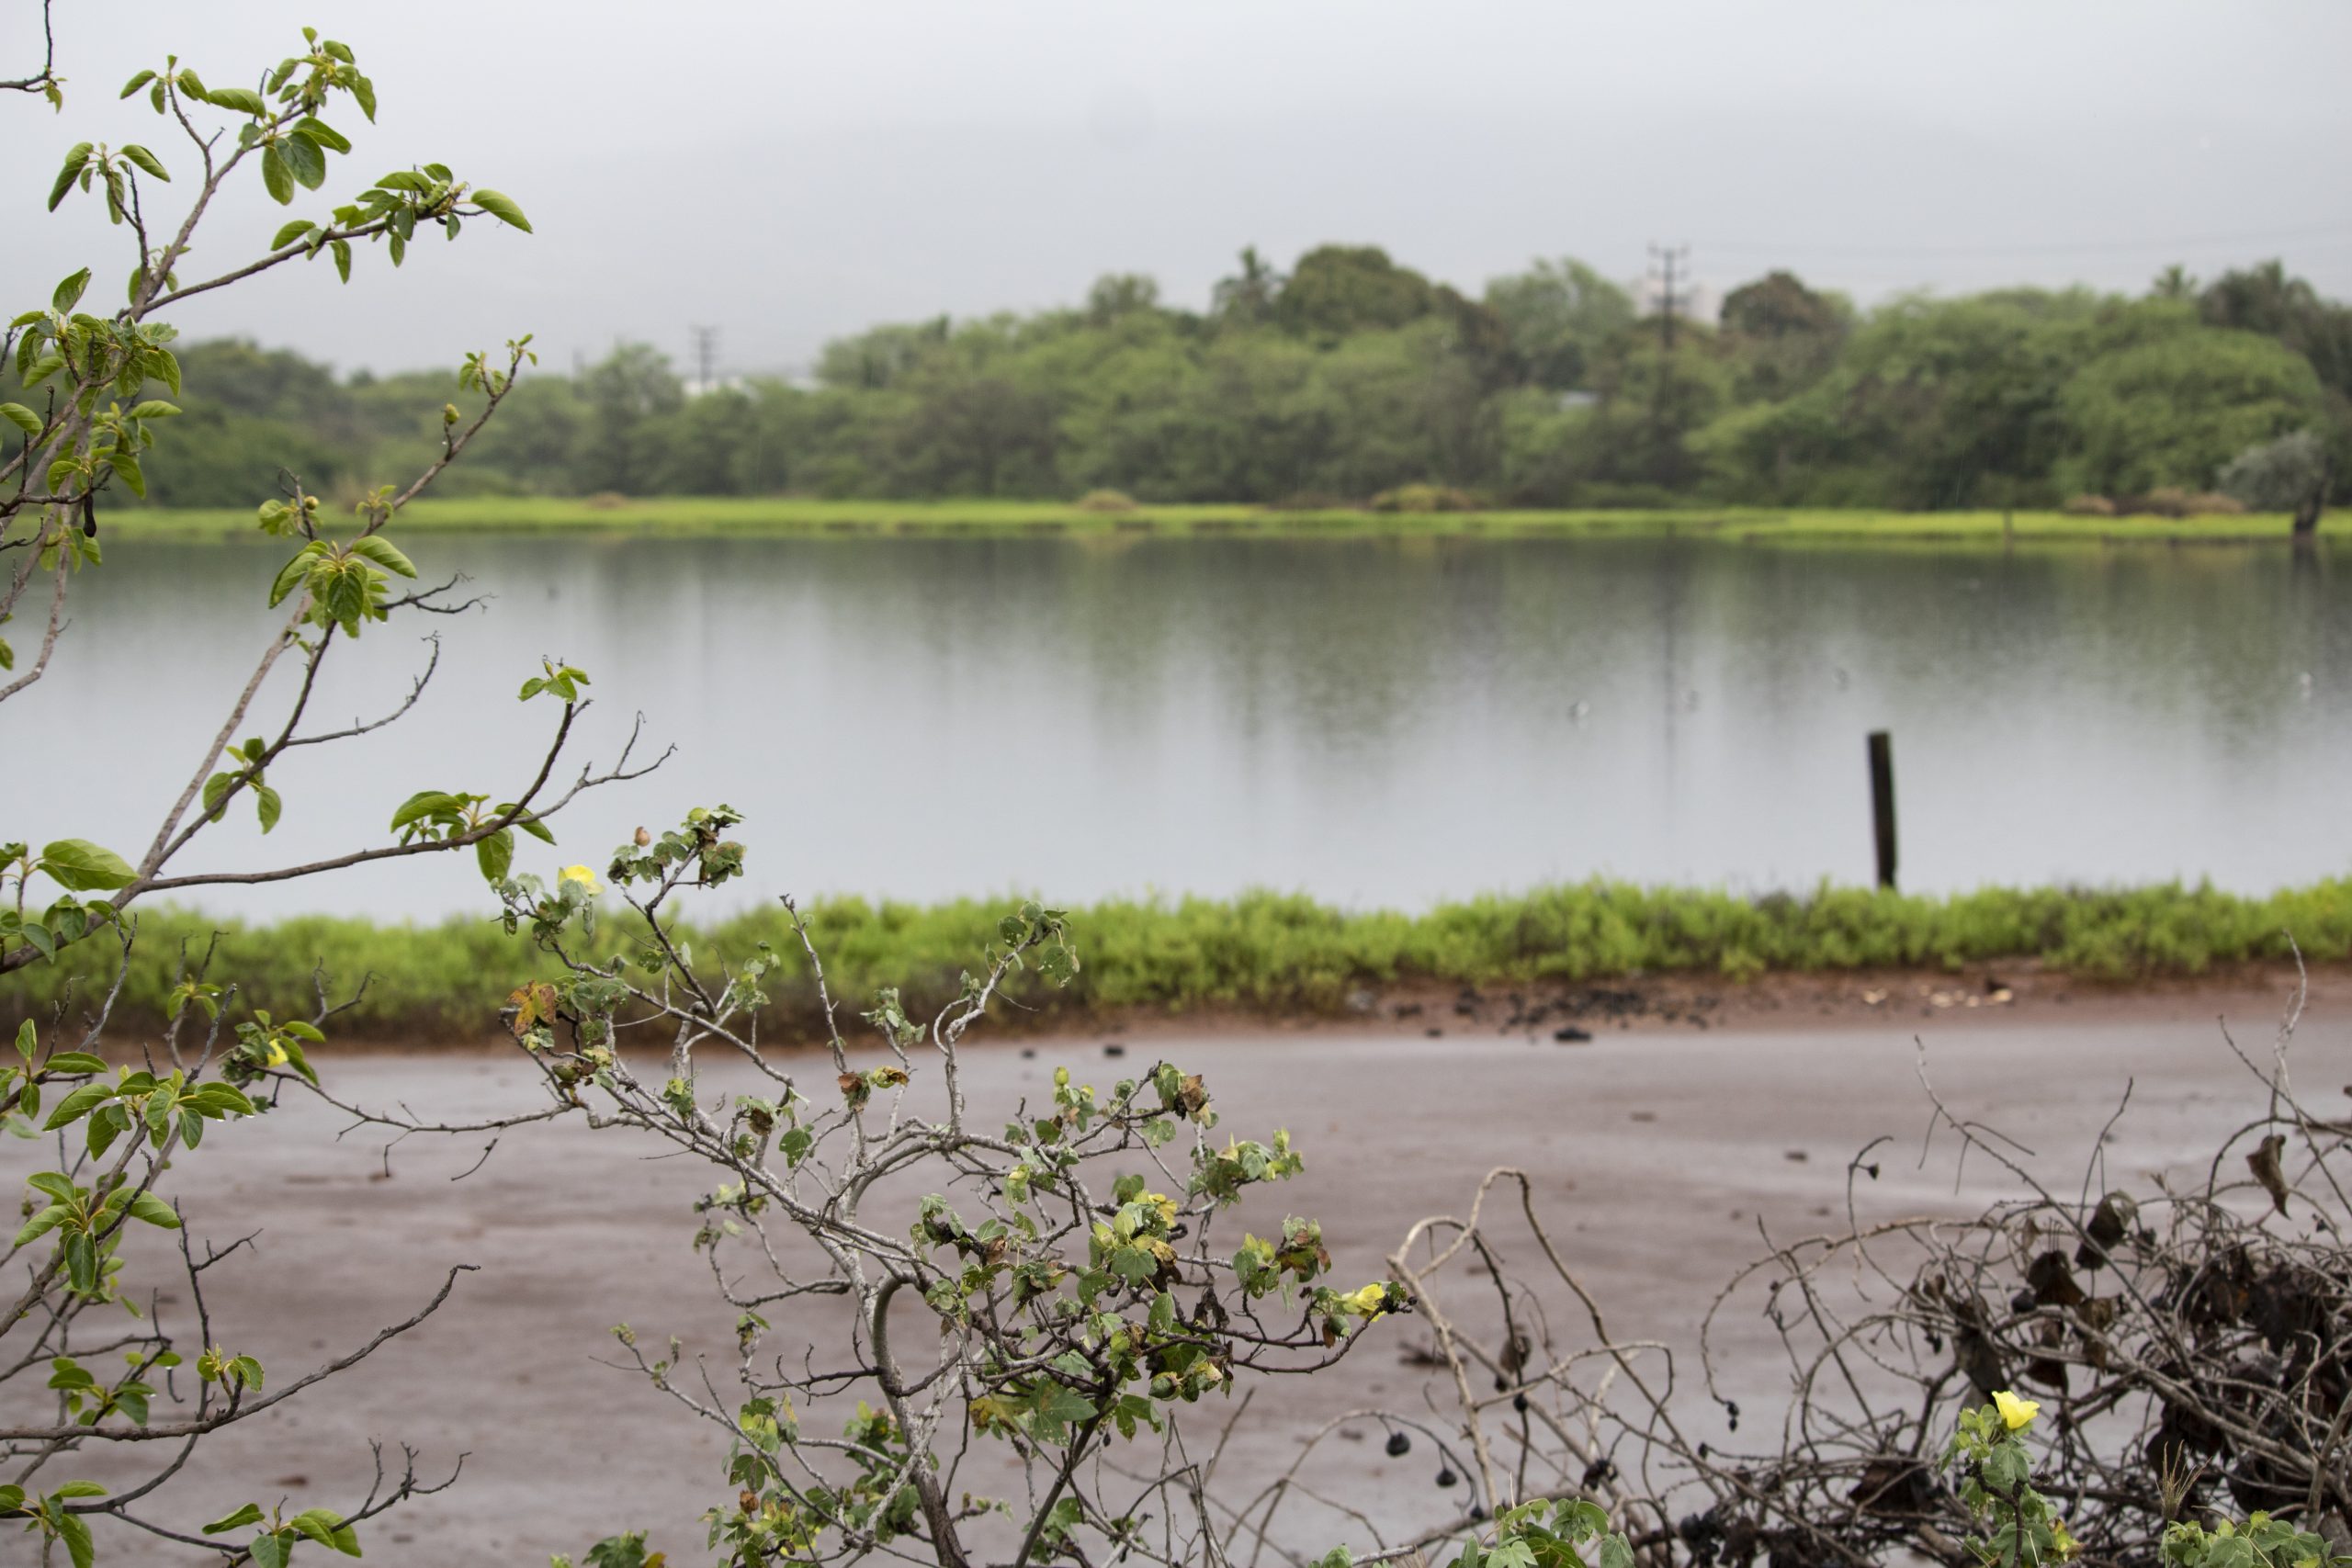 An image of Pouhala Marsh